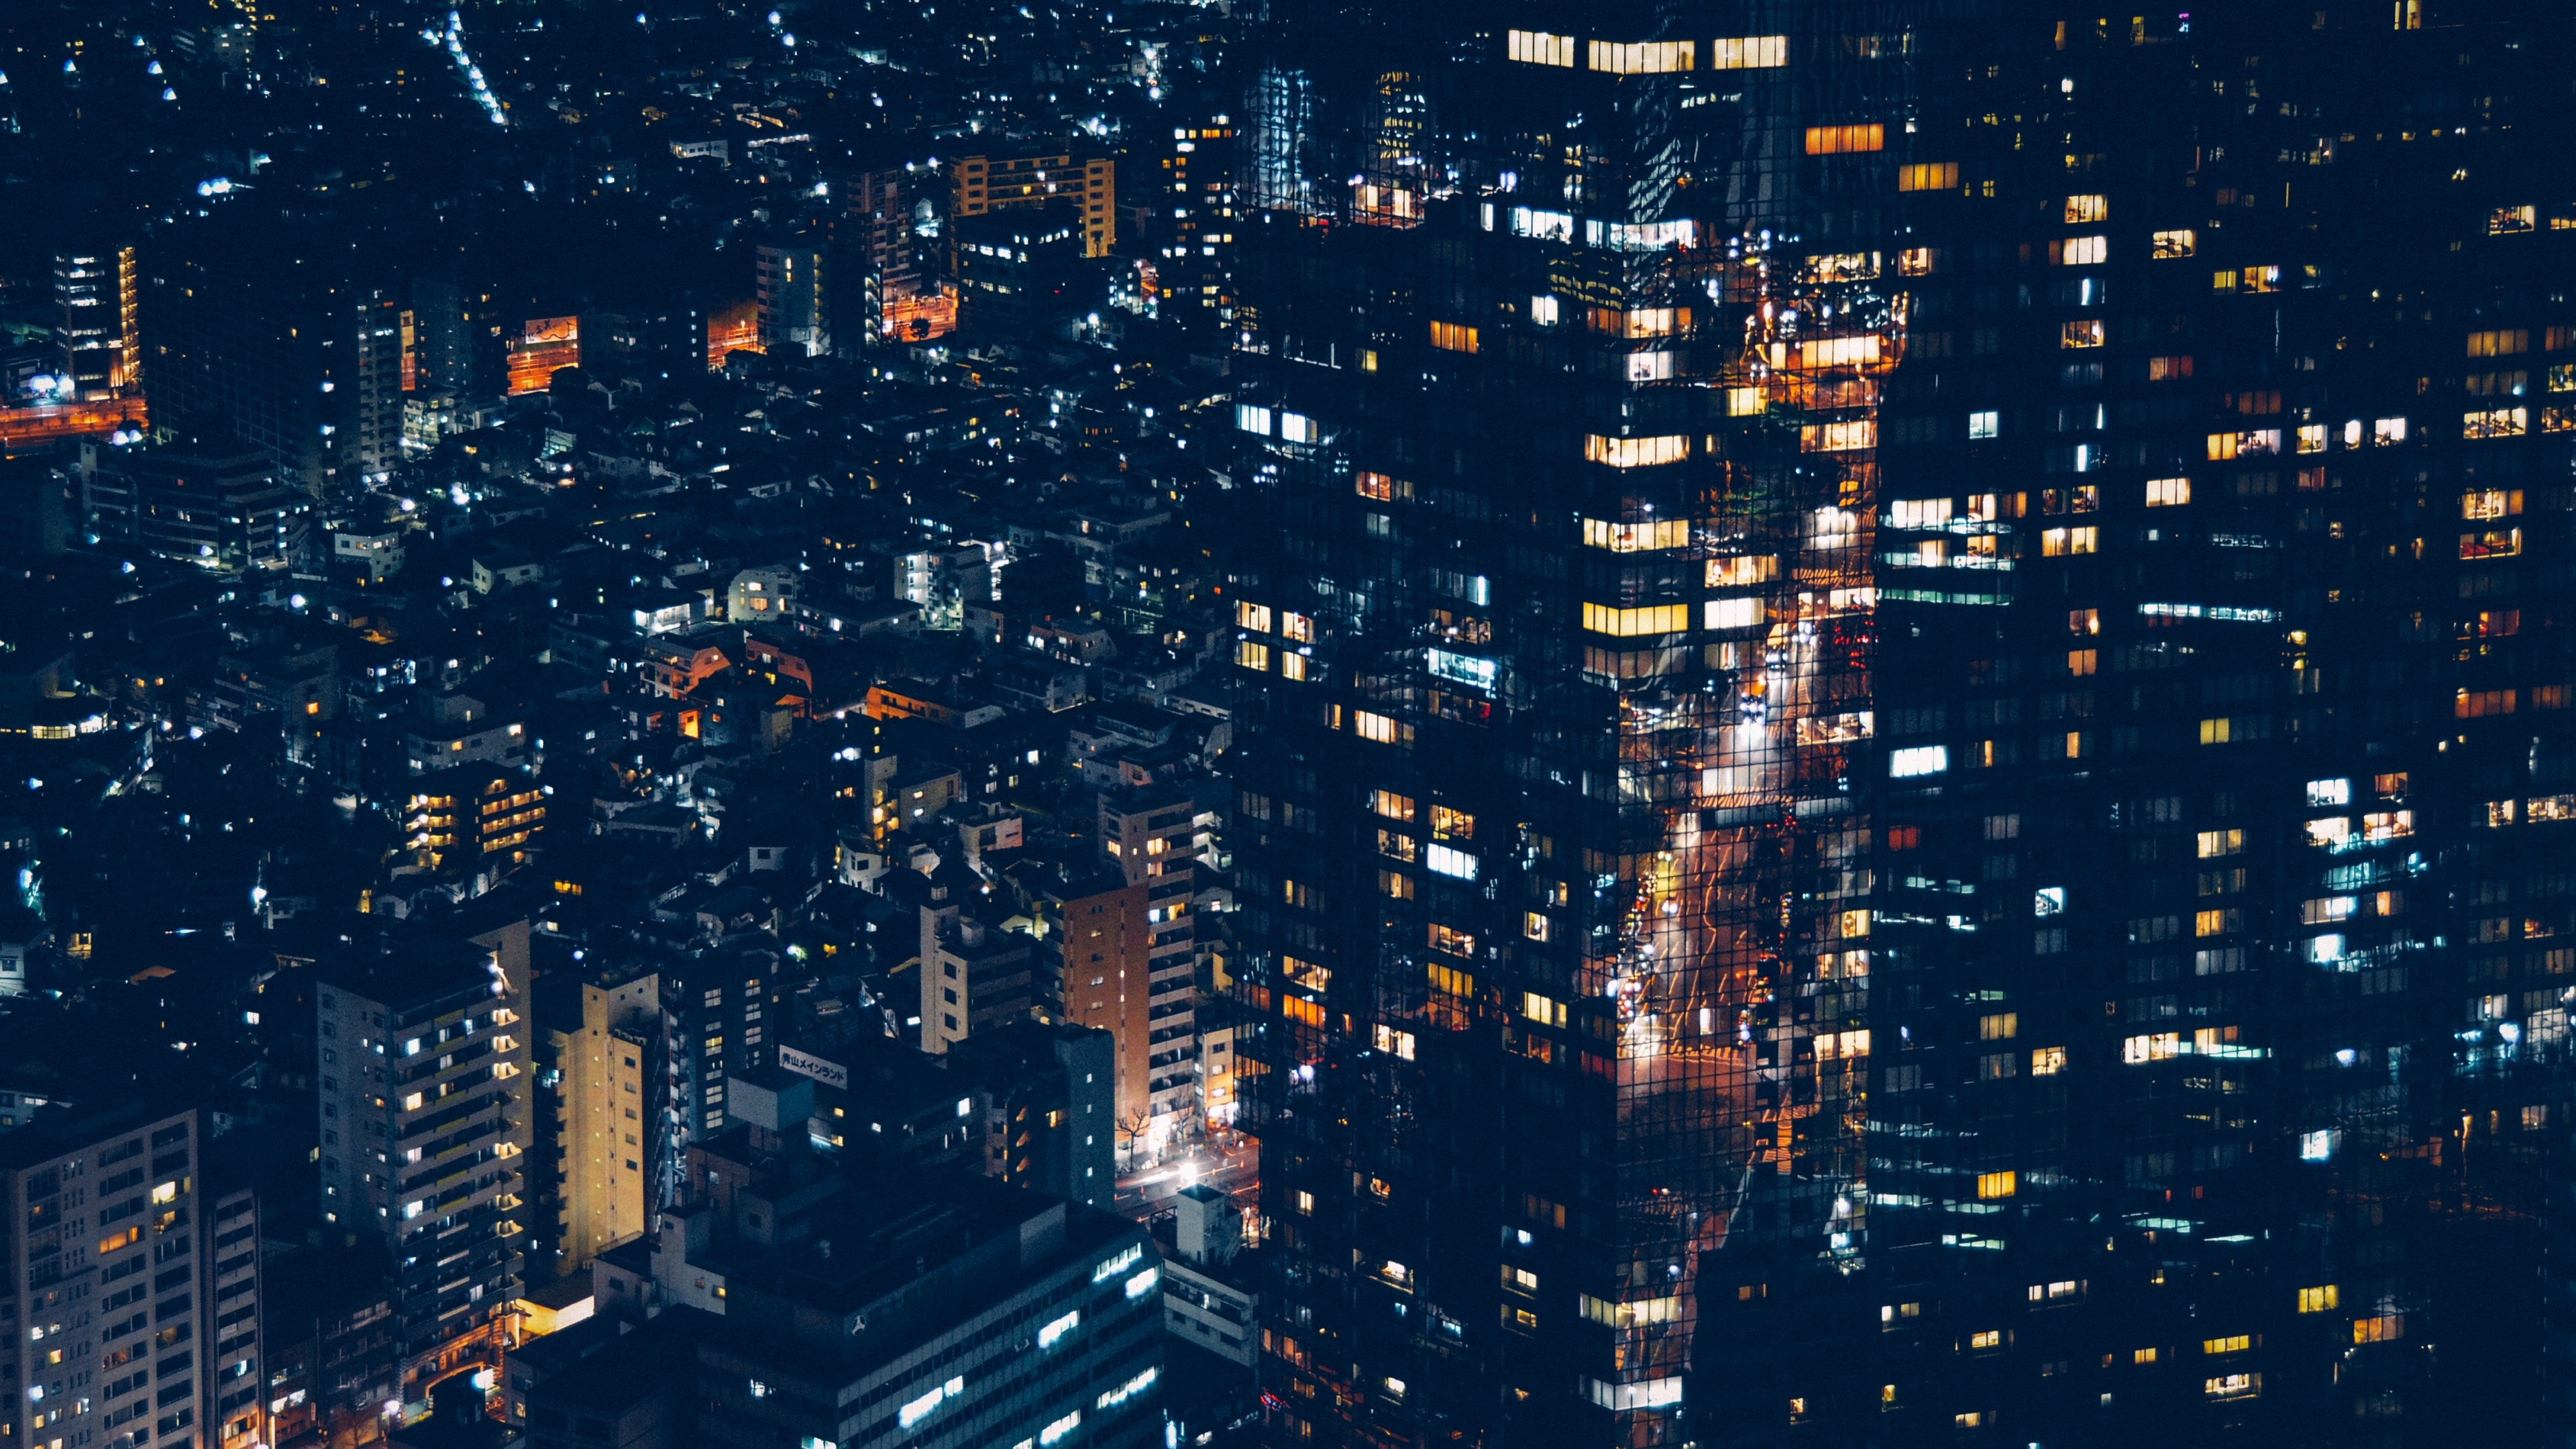 3840x2160 # the skyline of tokyo lit up at nighttokyo at night 4k wallpaper  and background #53033